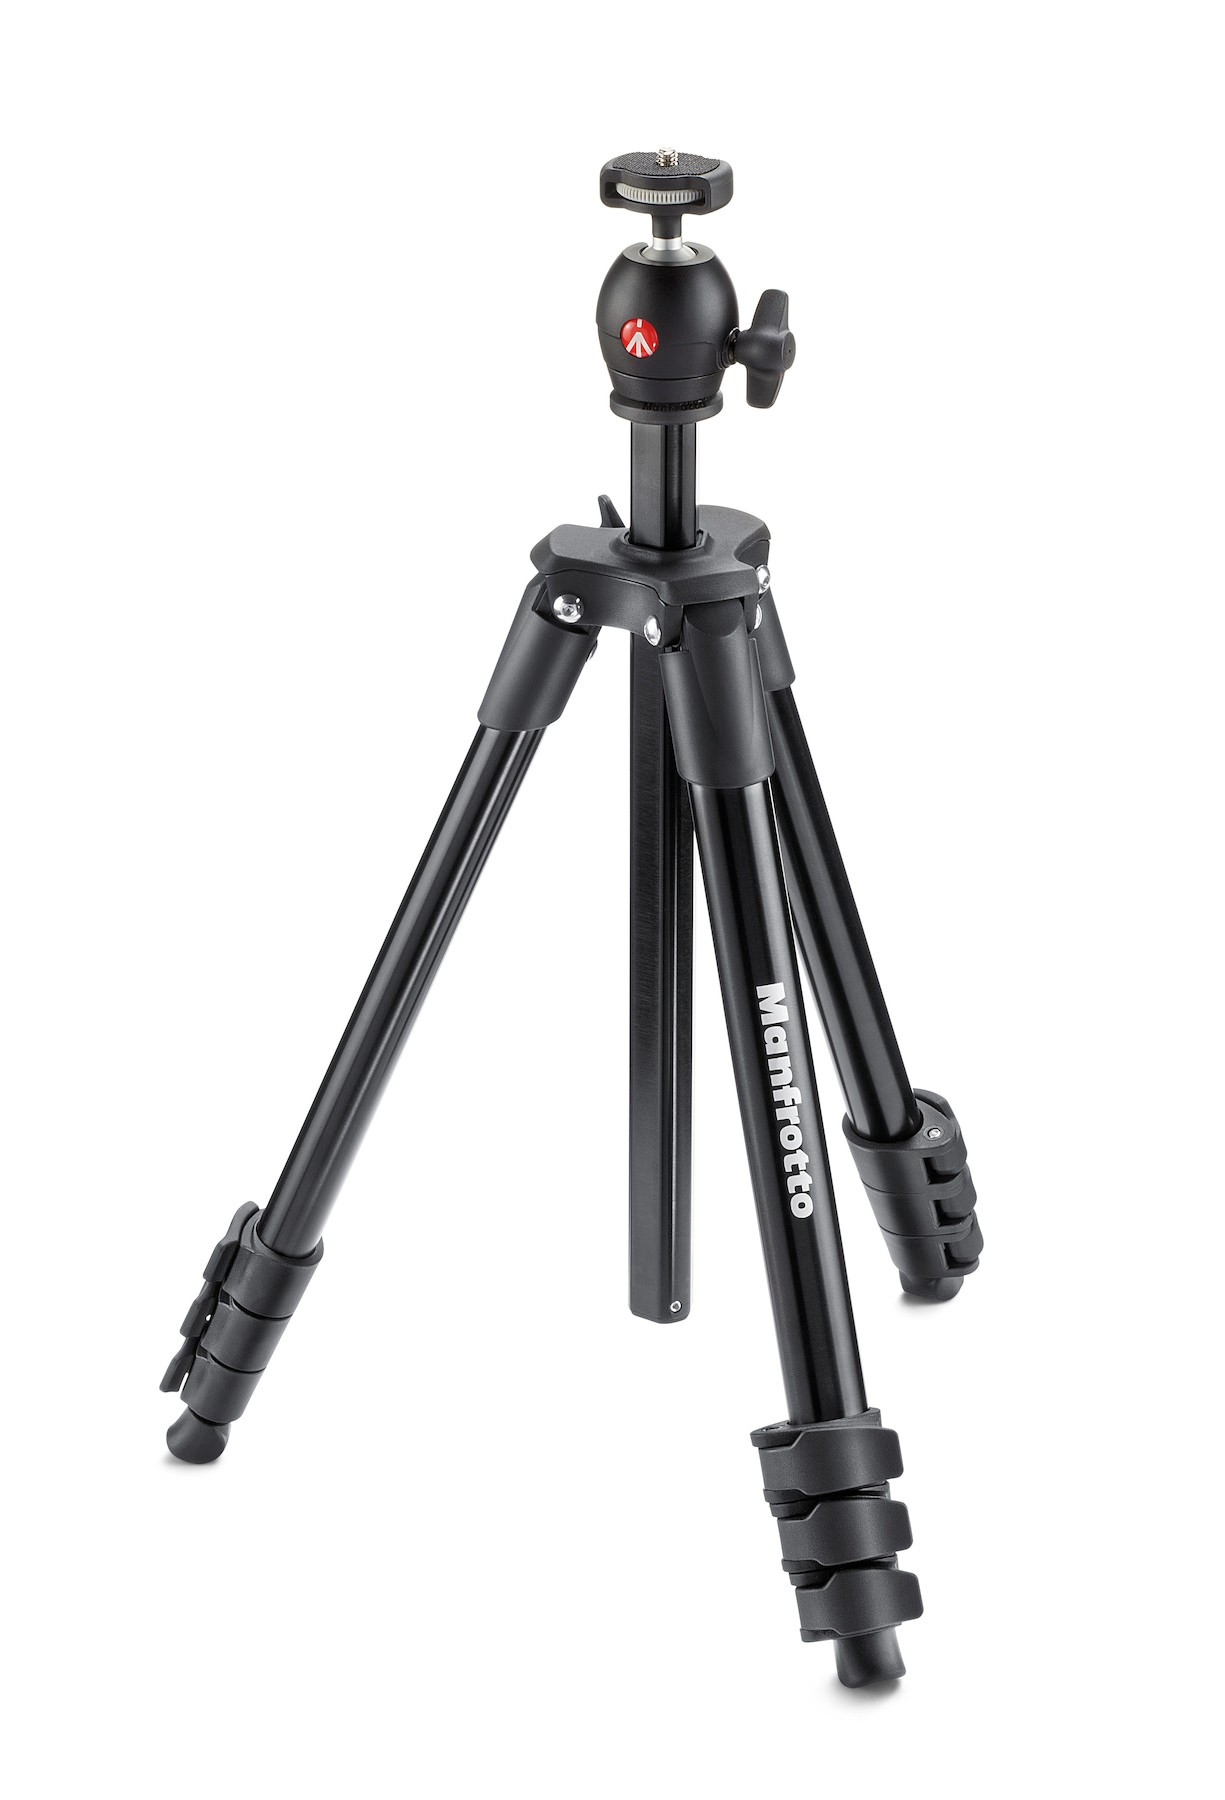 Manfrotto Compact Light black